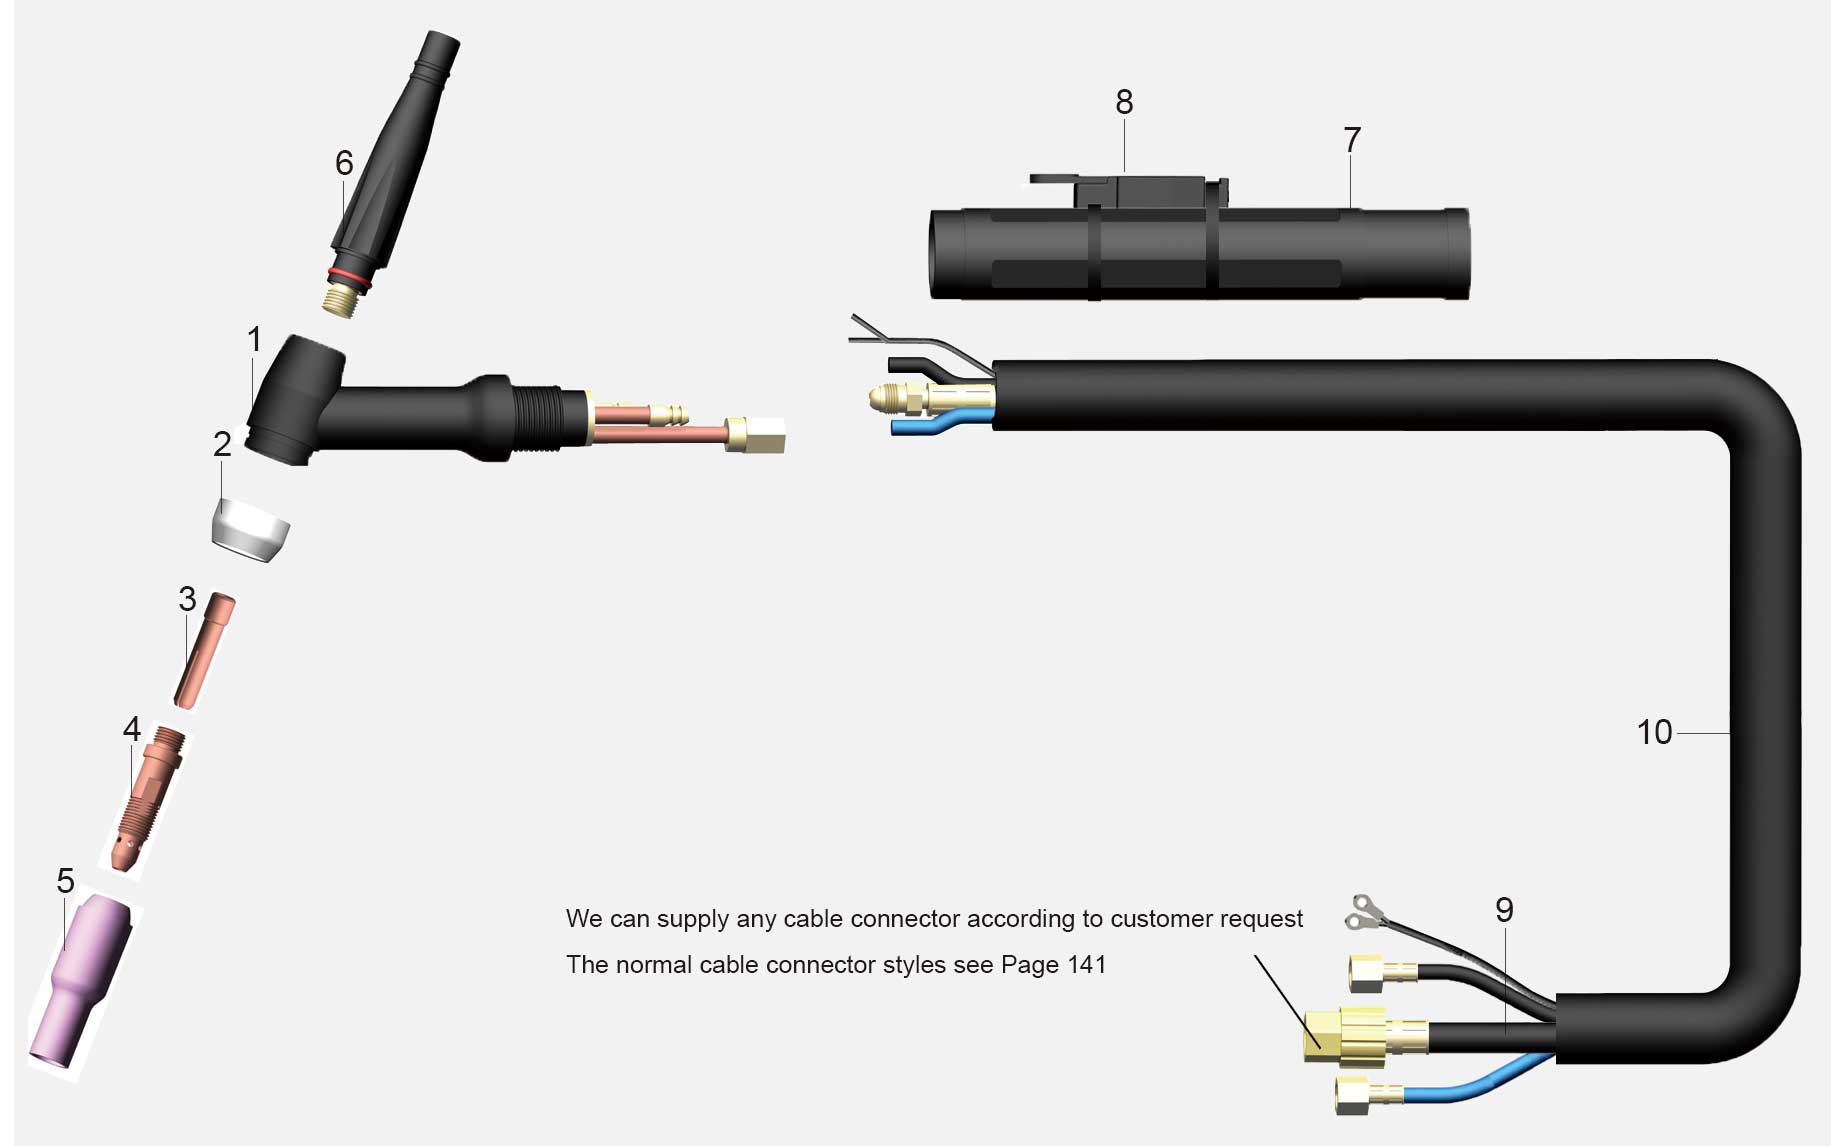 Product structure of the BW-308TW Liquid Cooled tig welding torch